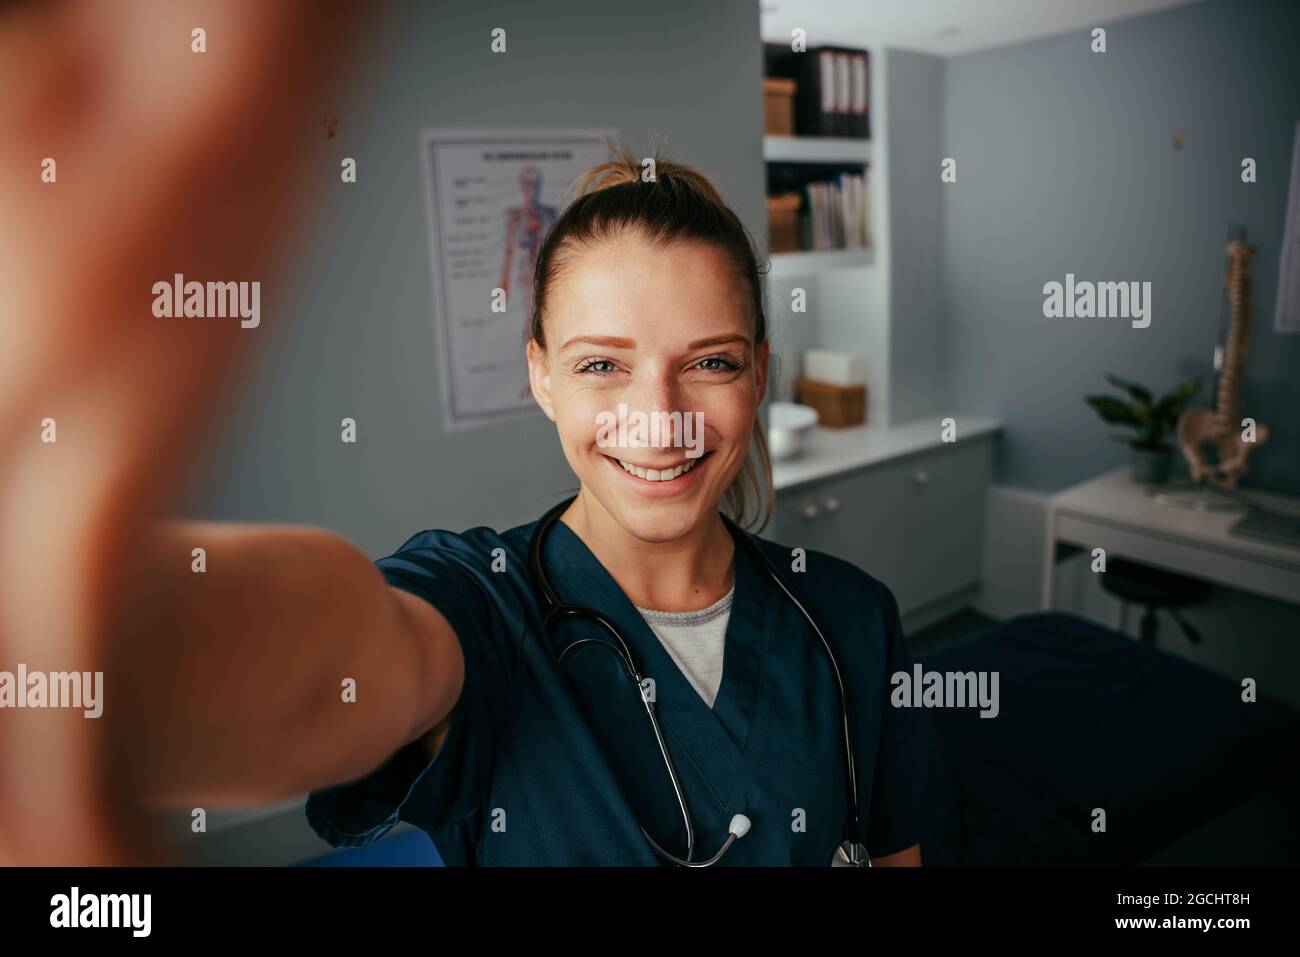 Caucasian female doctor taking selfie in doctors office with cellular device Stock Photo